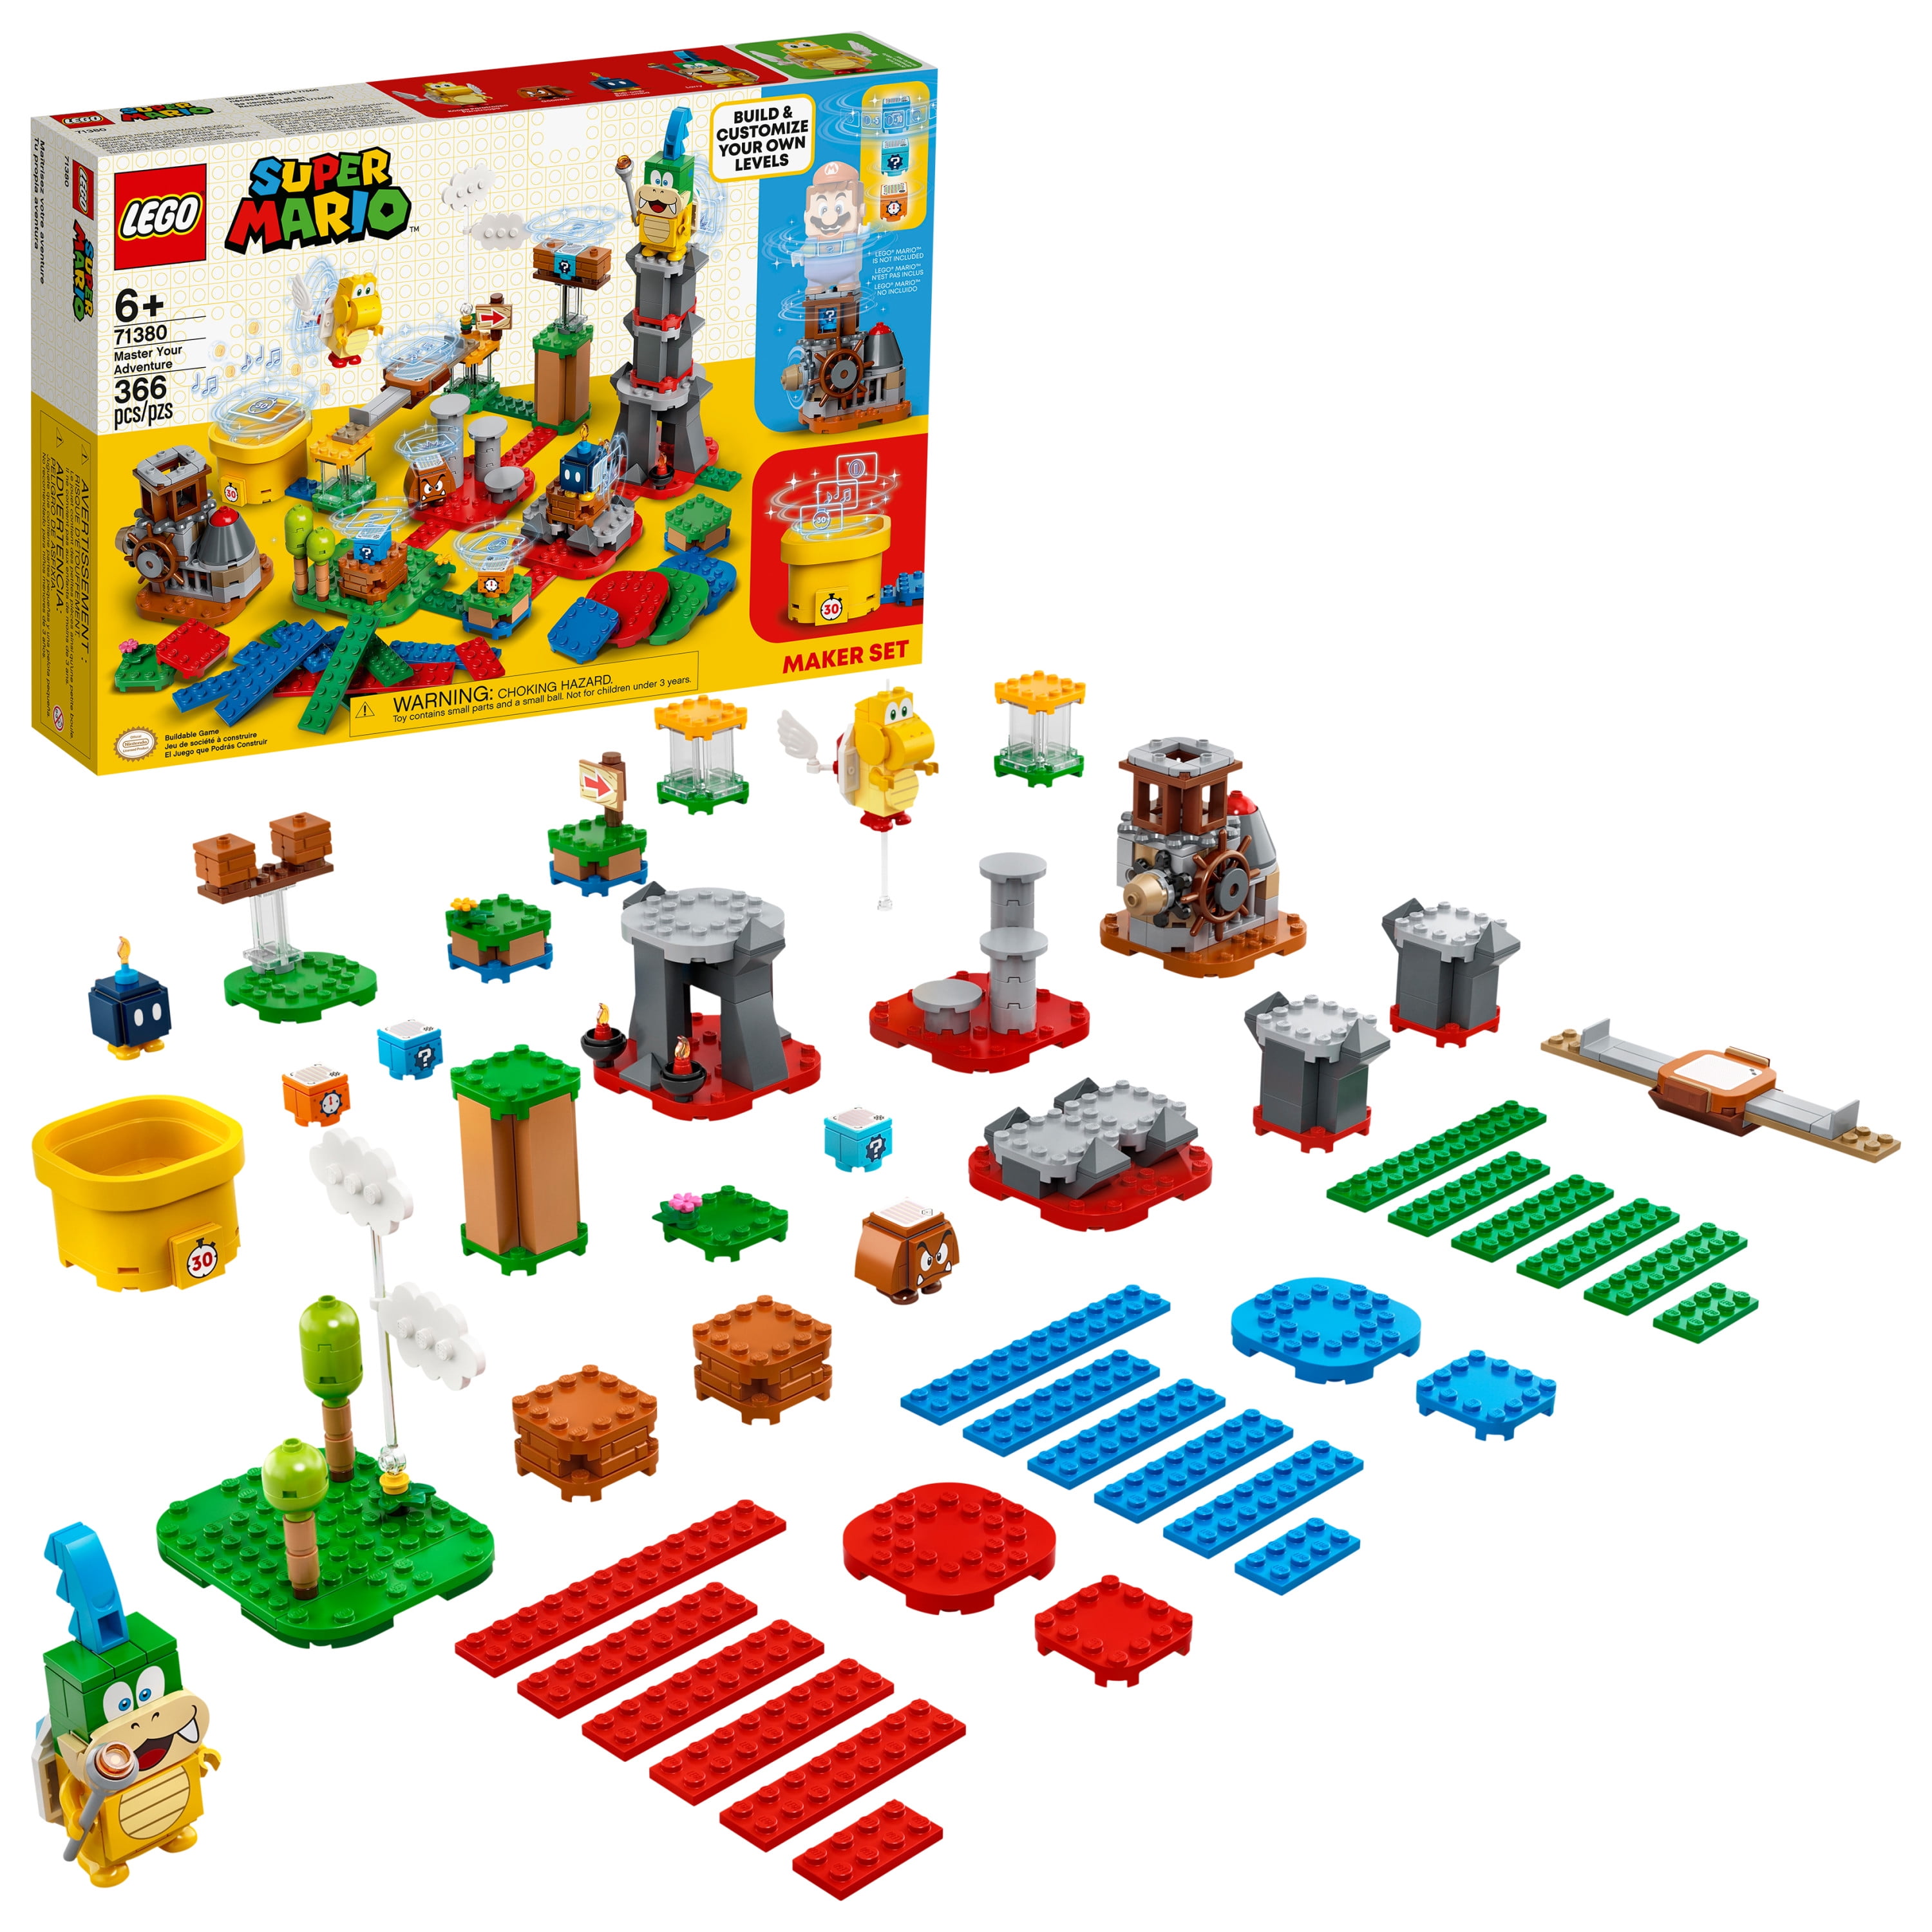 71360 New 2020 LEGO Super Mario Toad’s Treasure Hunt Expansion Set 71368 Building Kit; Toy for Kids to Boost Their LEGO Super Mario Adventures with Mario Starter Course Playset 464 Pieces